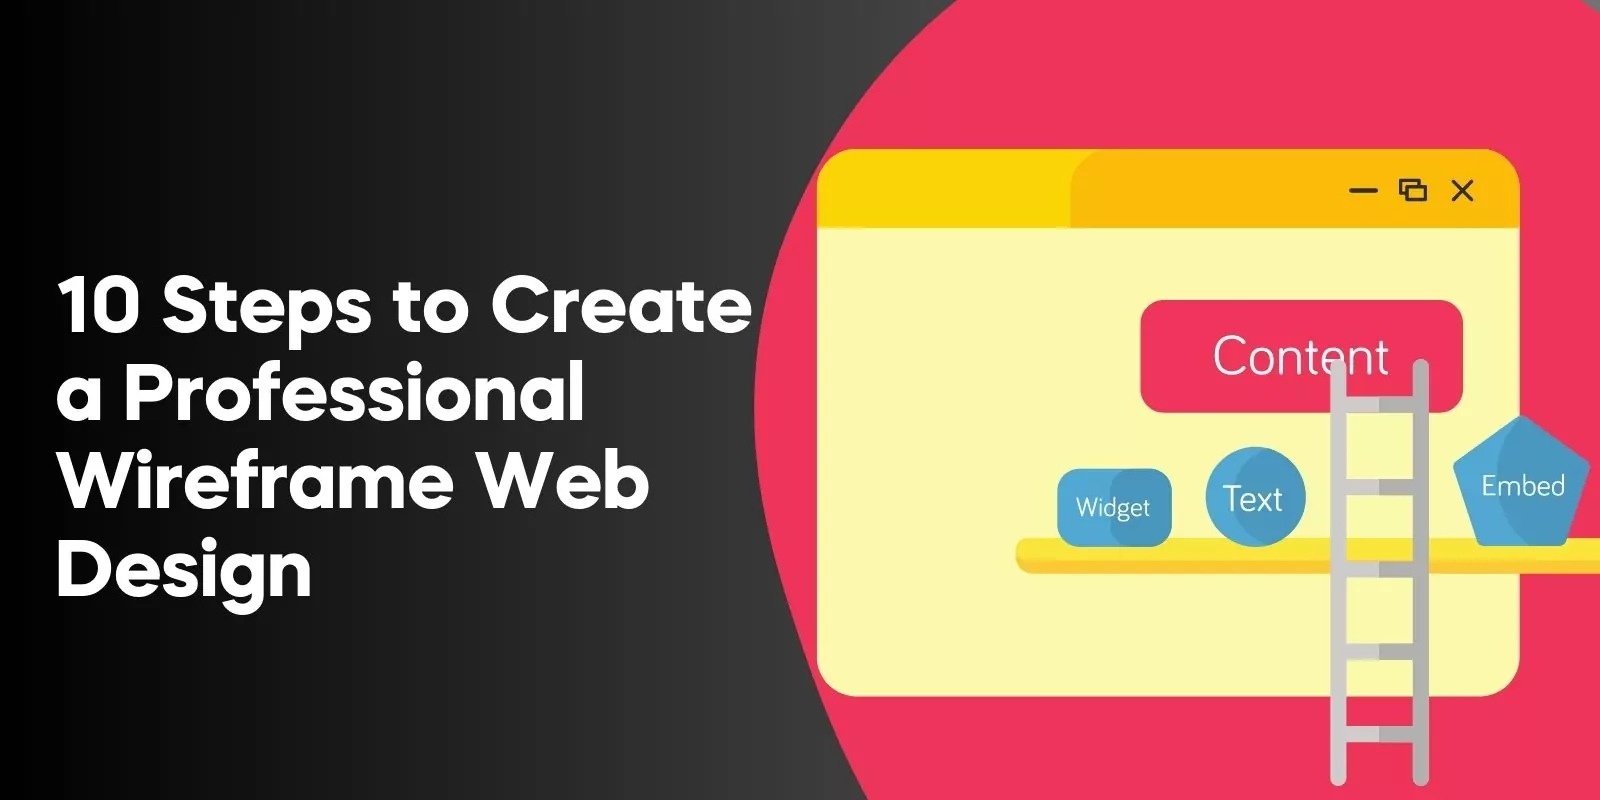 10 Steps to Create a Professional Wireframe Web Design